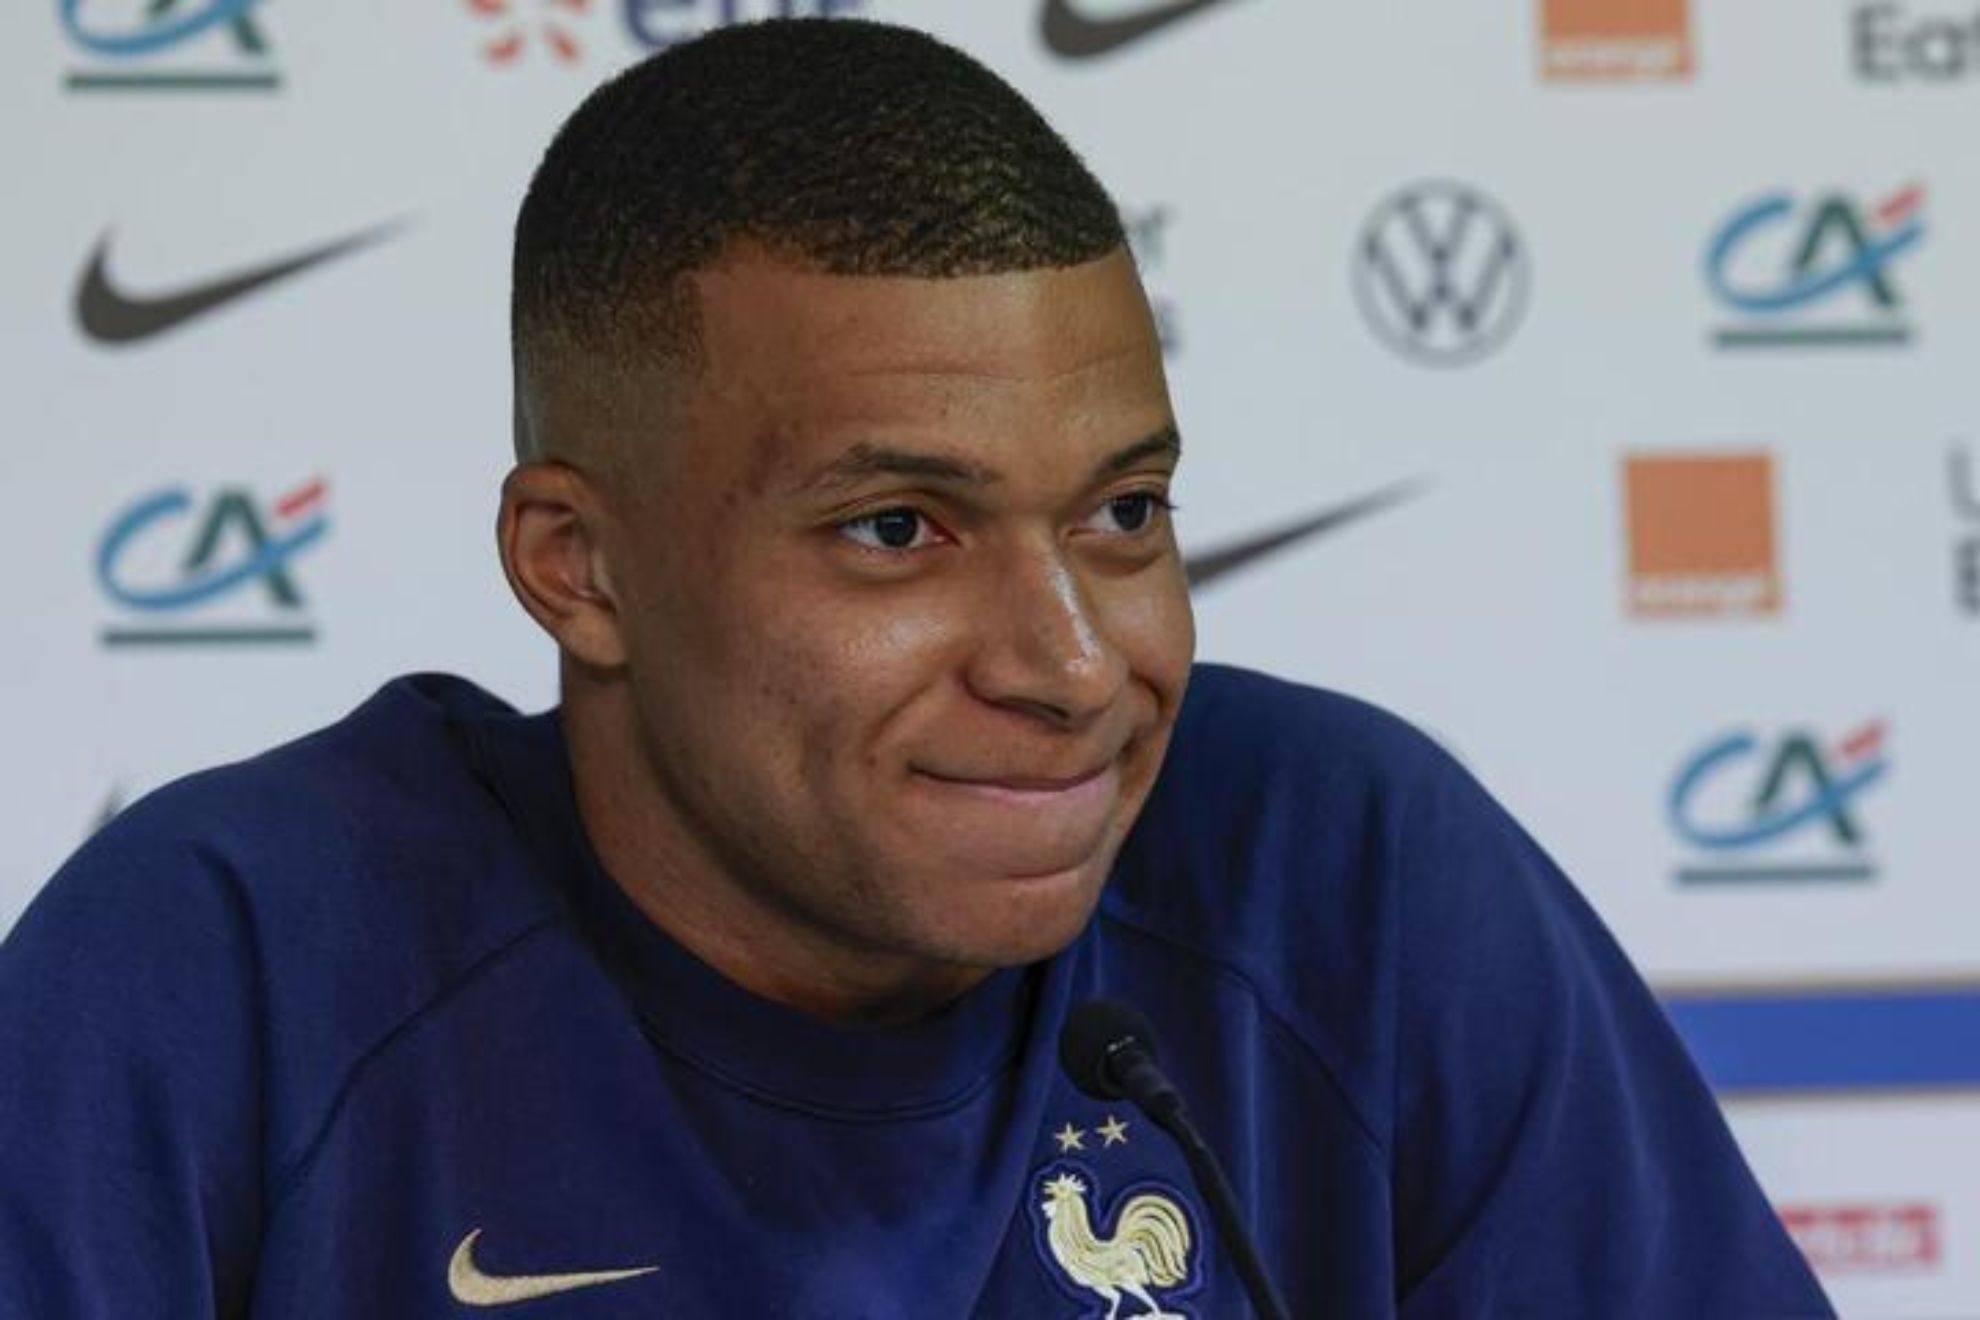 Kylian Mbappe during a press conference